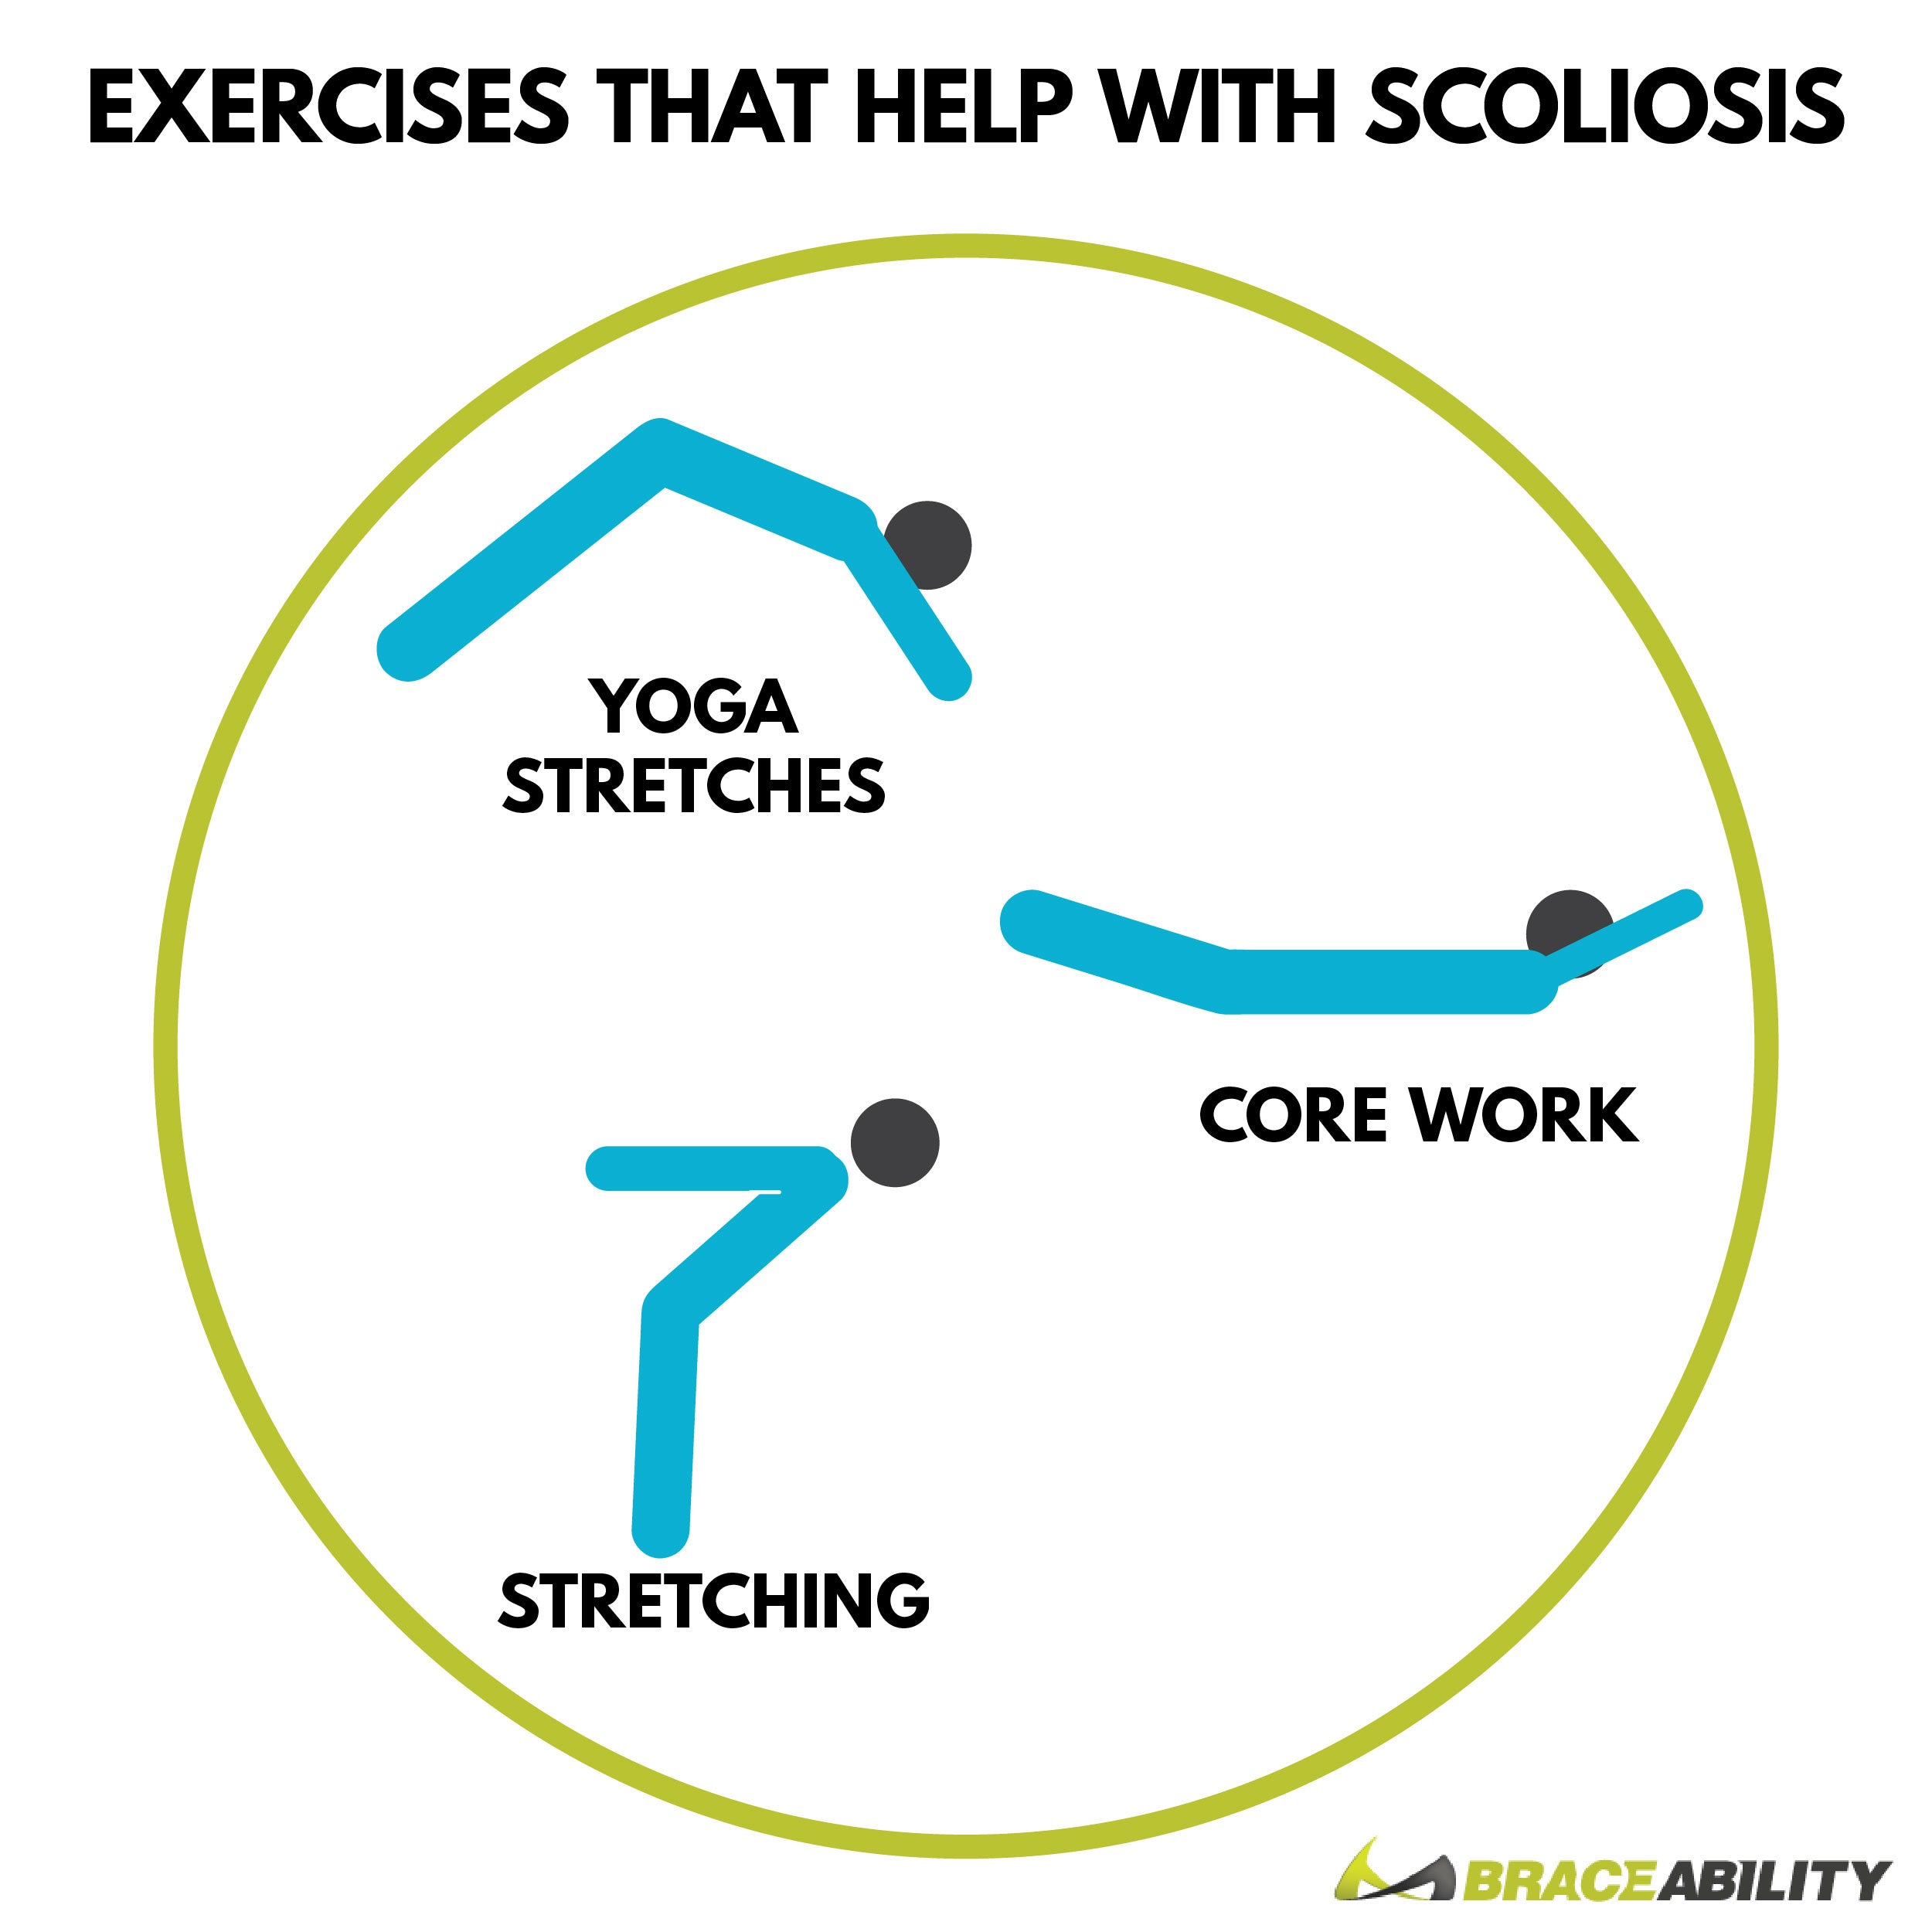 yoga stretches and core workouts are the best to help with scoliosis